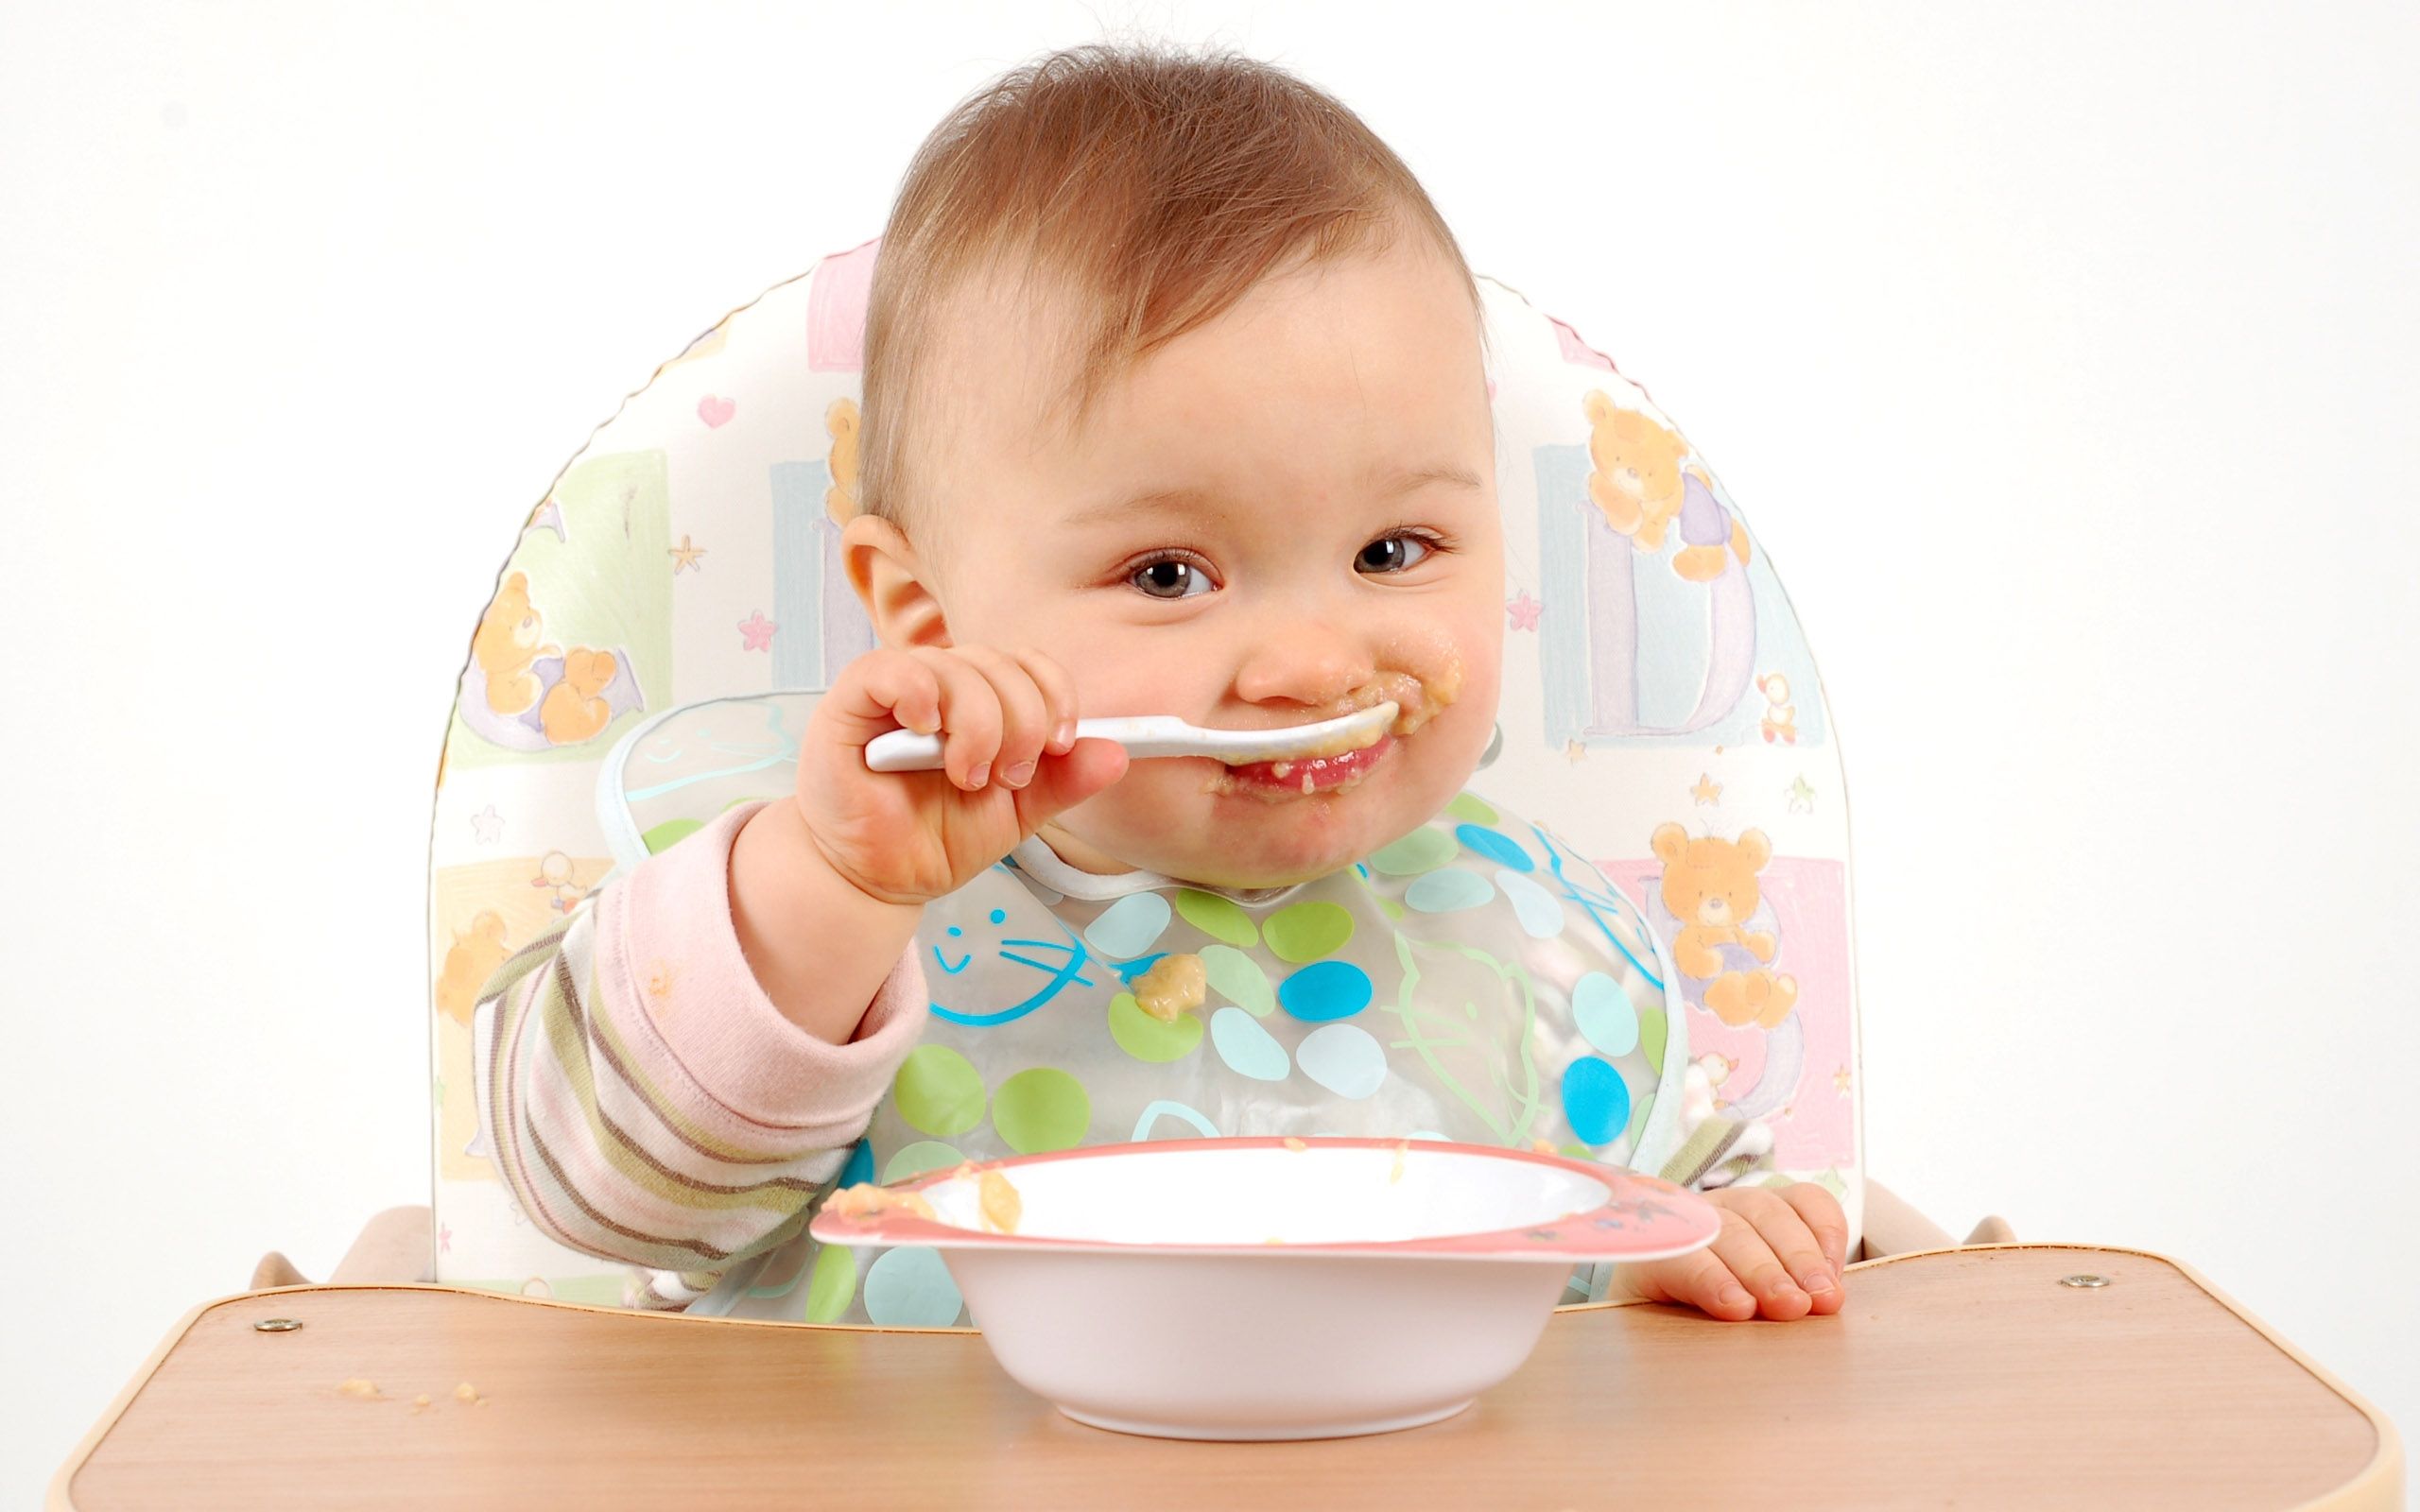 Wallpaper, child, face, food, spoon, baby 2560x1600